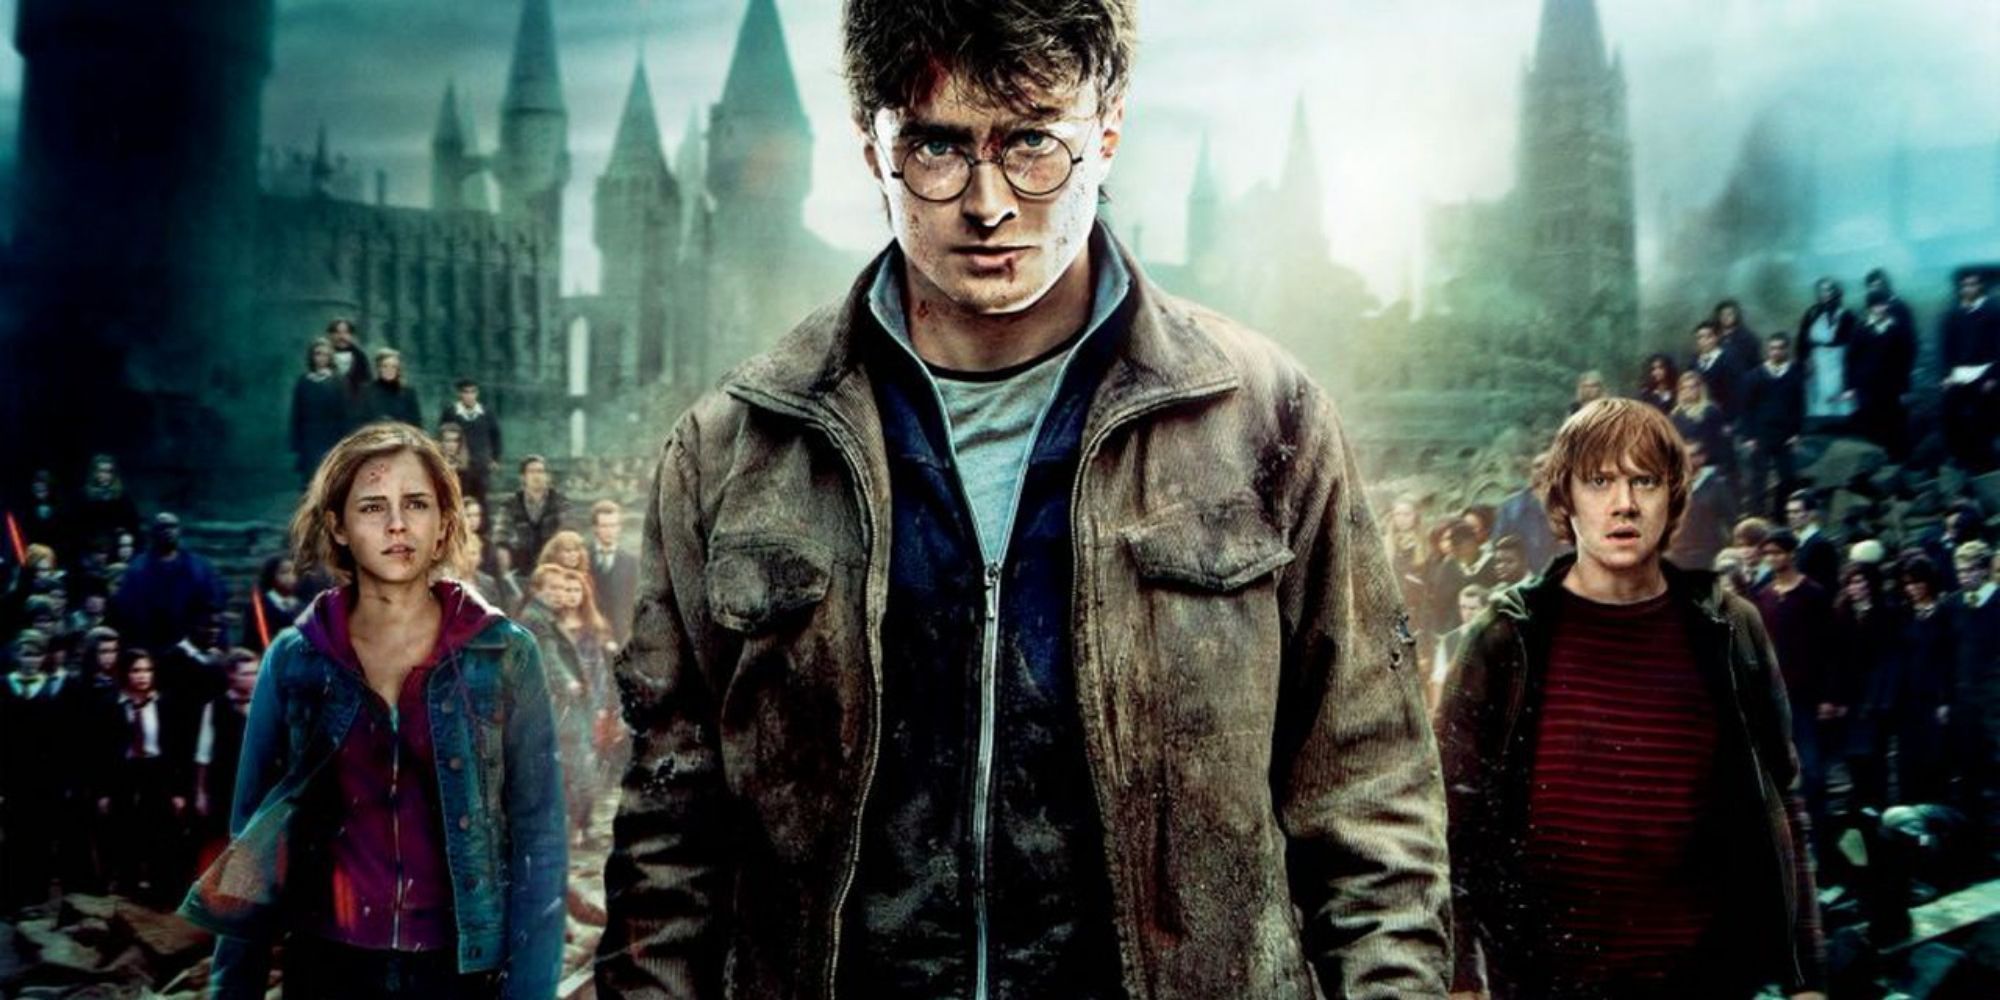 Promotional image of Harry Potter and the Deathly Hallows, Part Two.